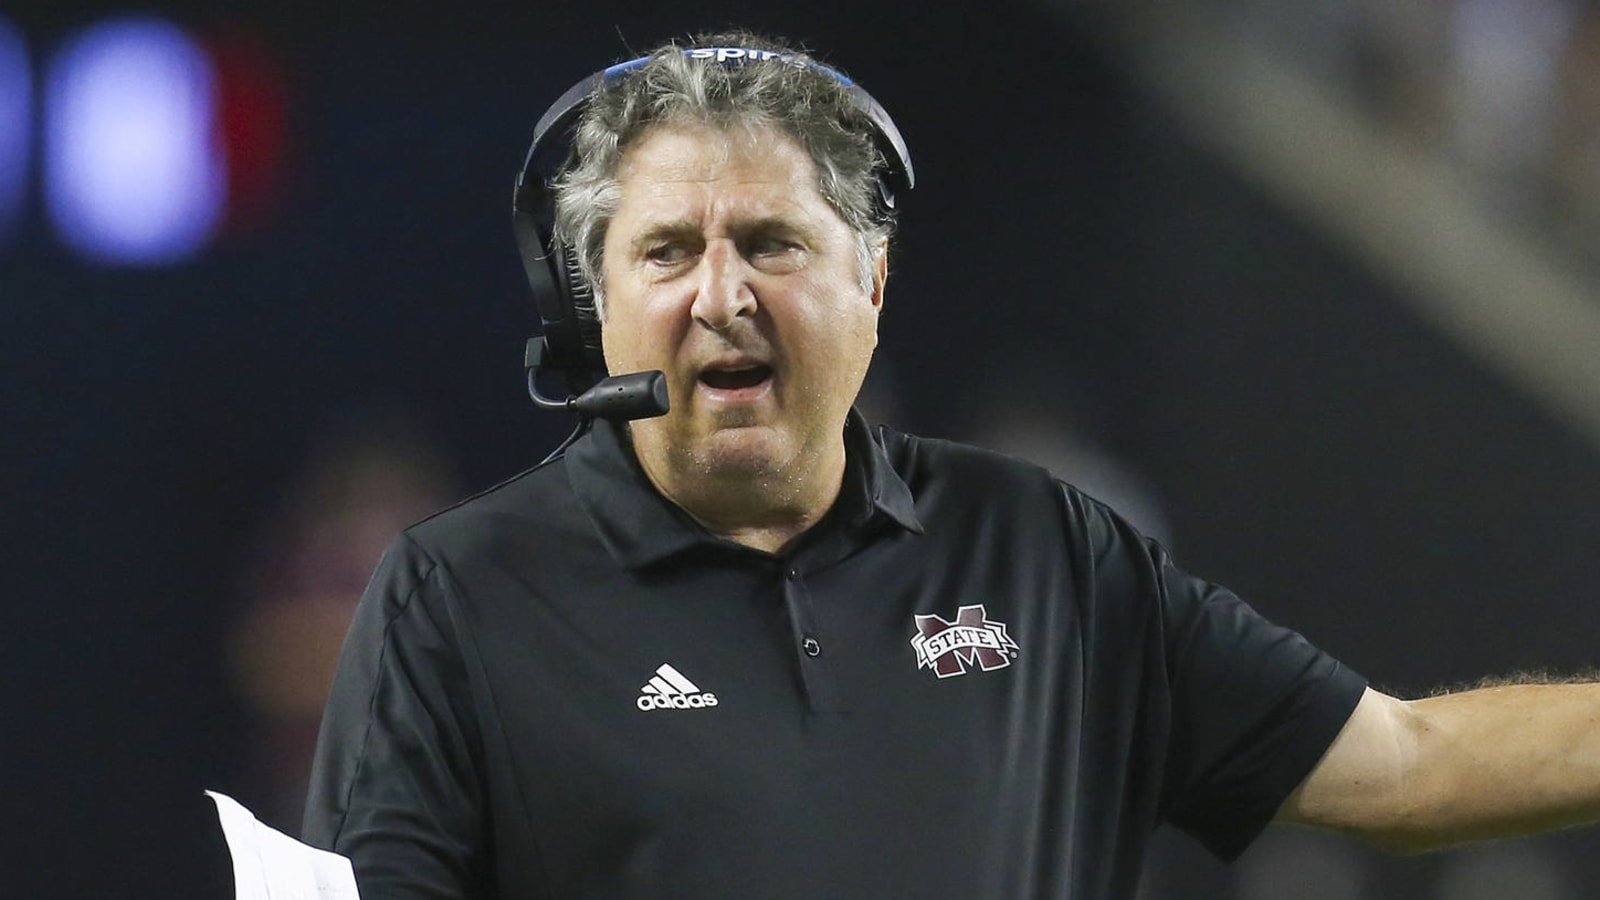 Mike Leach has opinion on why so many coaches are being fired